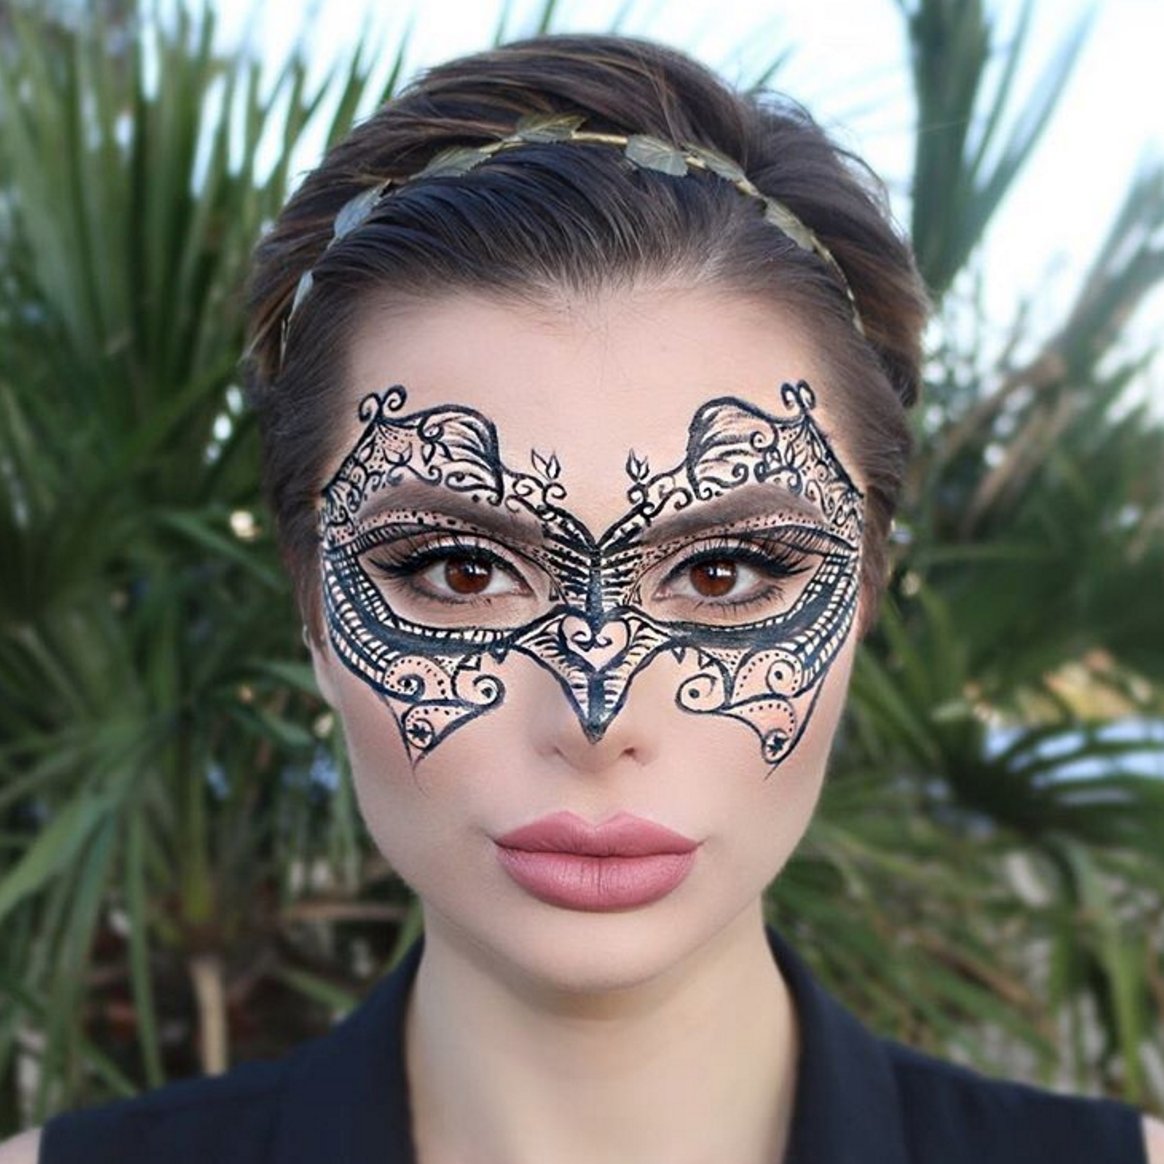 10 Fashionable Face Makeup Ideas For Halloween 5 easy halloween makeup ideas you can do with only eyeliner glamour 2024